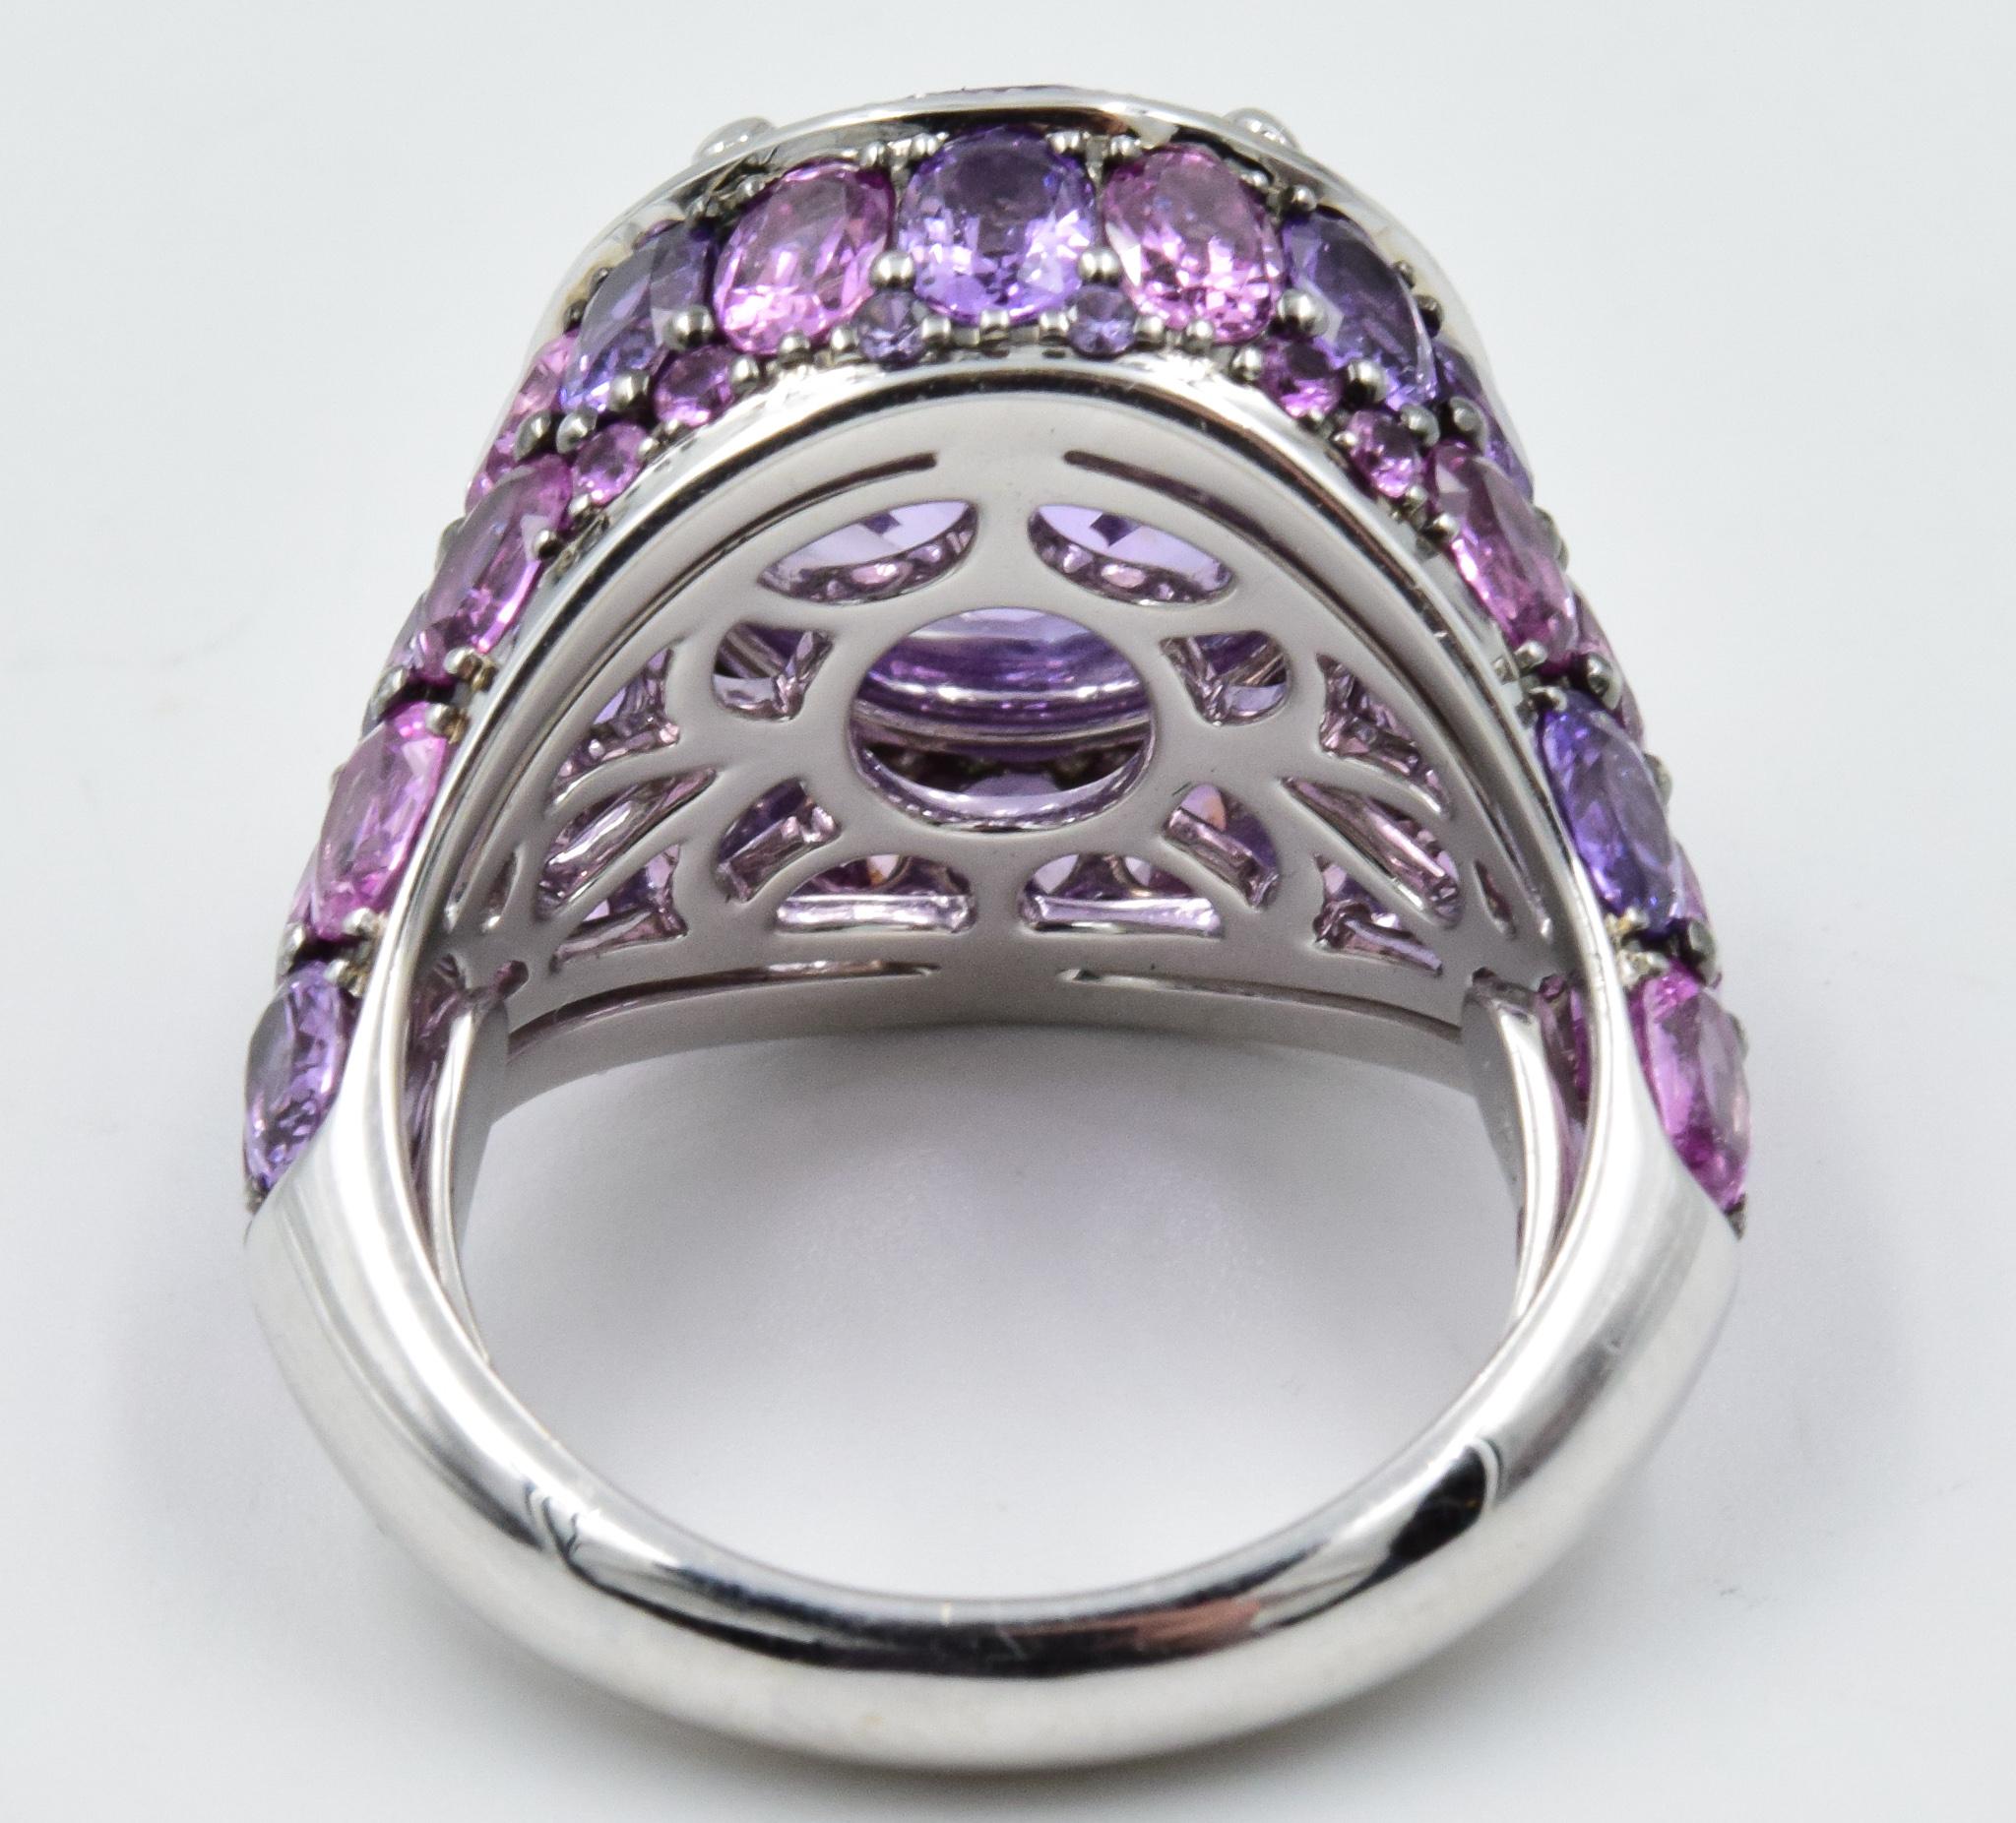 This American Glamour ring by Robert Procop is crafted with the highest quality in all stages of this design coming to life.  The gemstone is an incredible 7.12 carat Oval Purple Sapphire with a GIA certification.  The side sapphires and diamonds